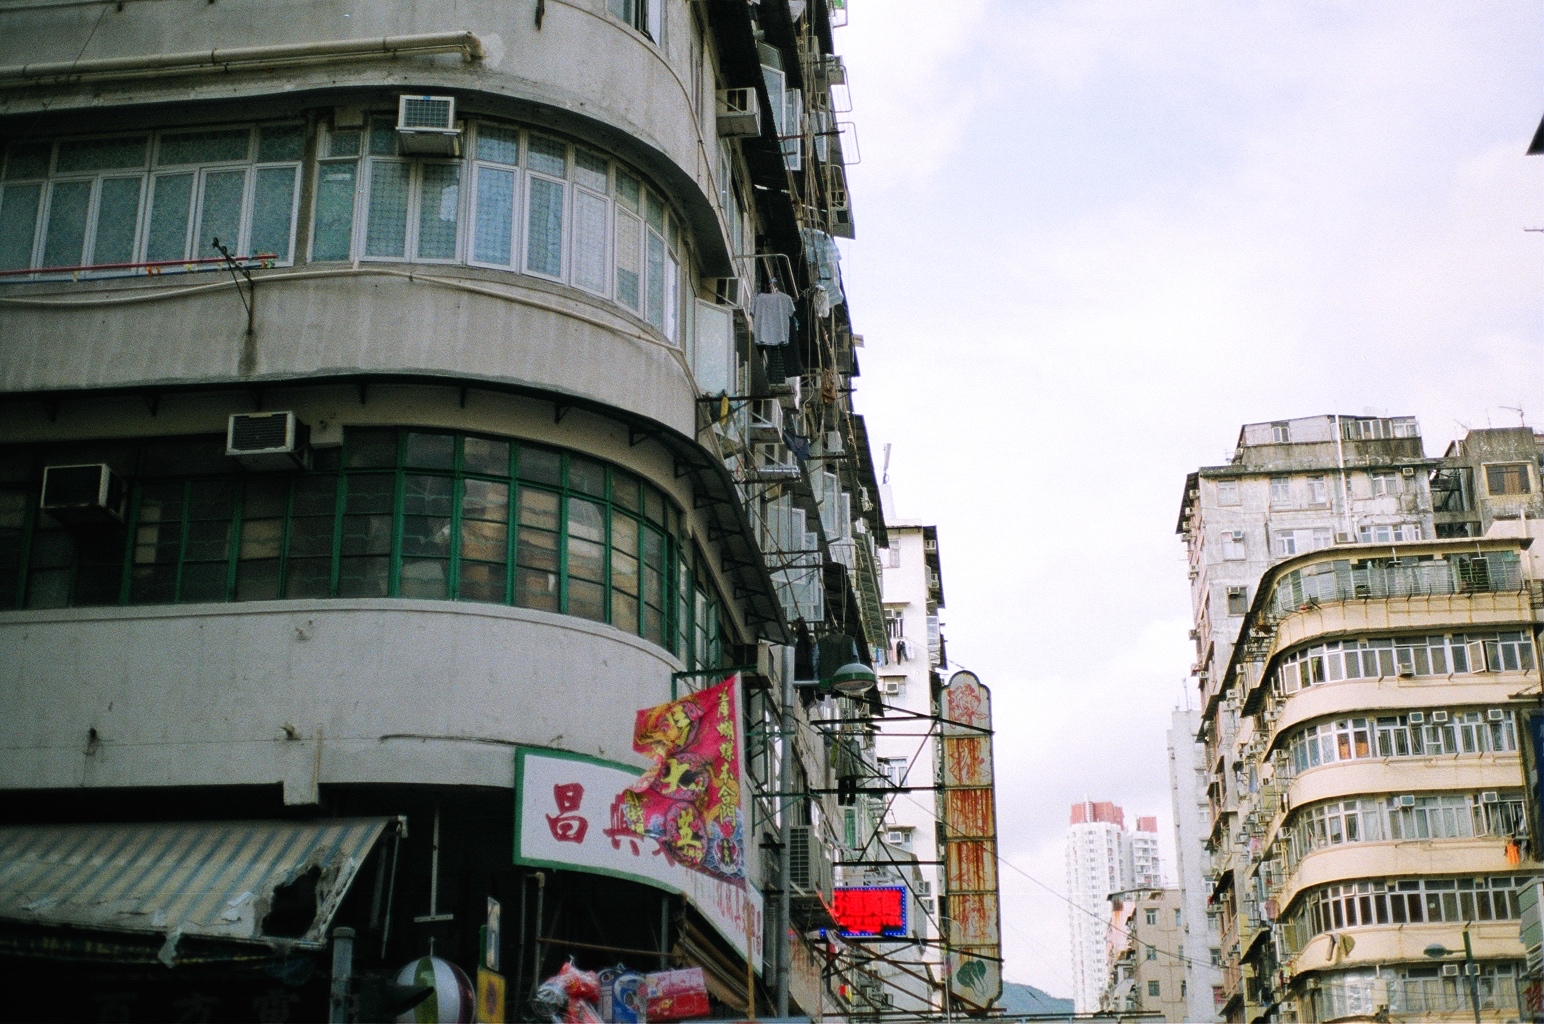 The “Disappearing” Buildings in Hong Kong (V) — Sham Shui Po Downgraded